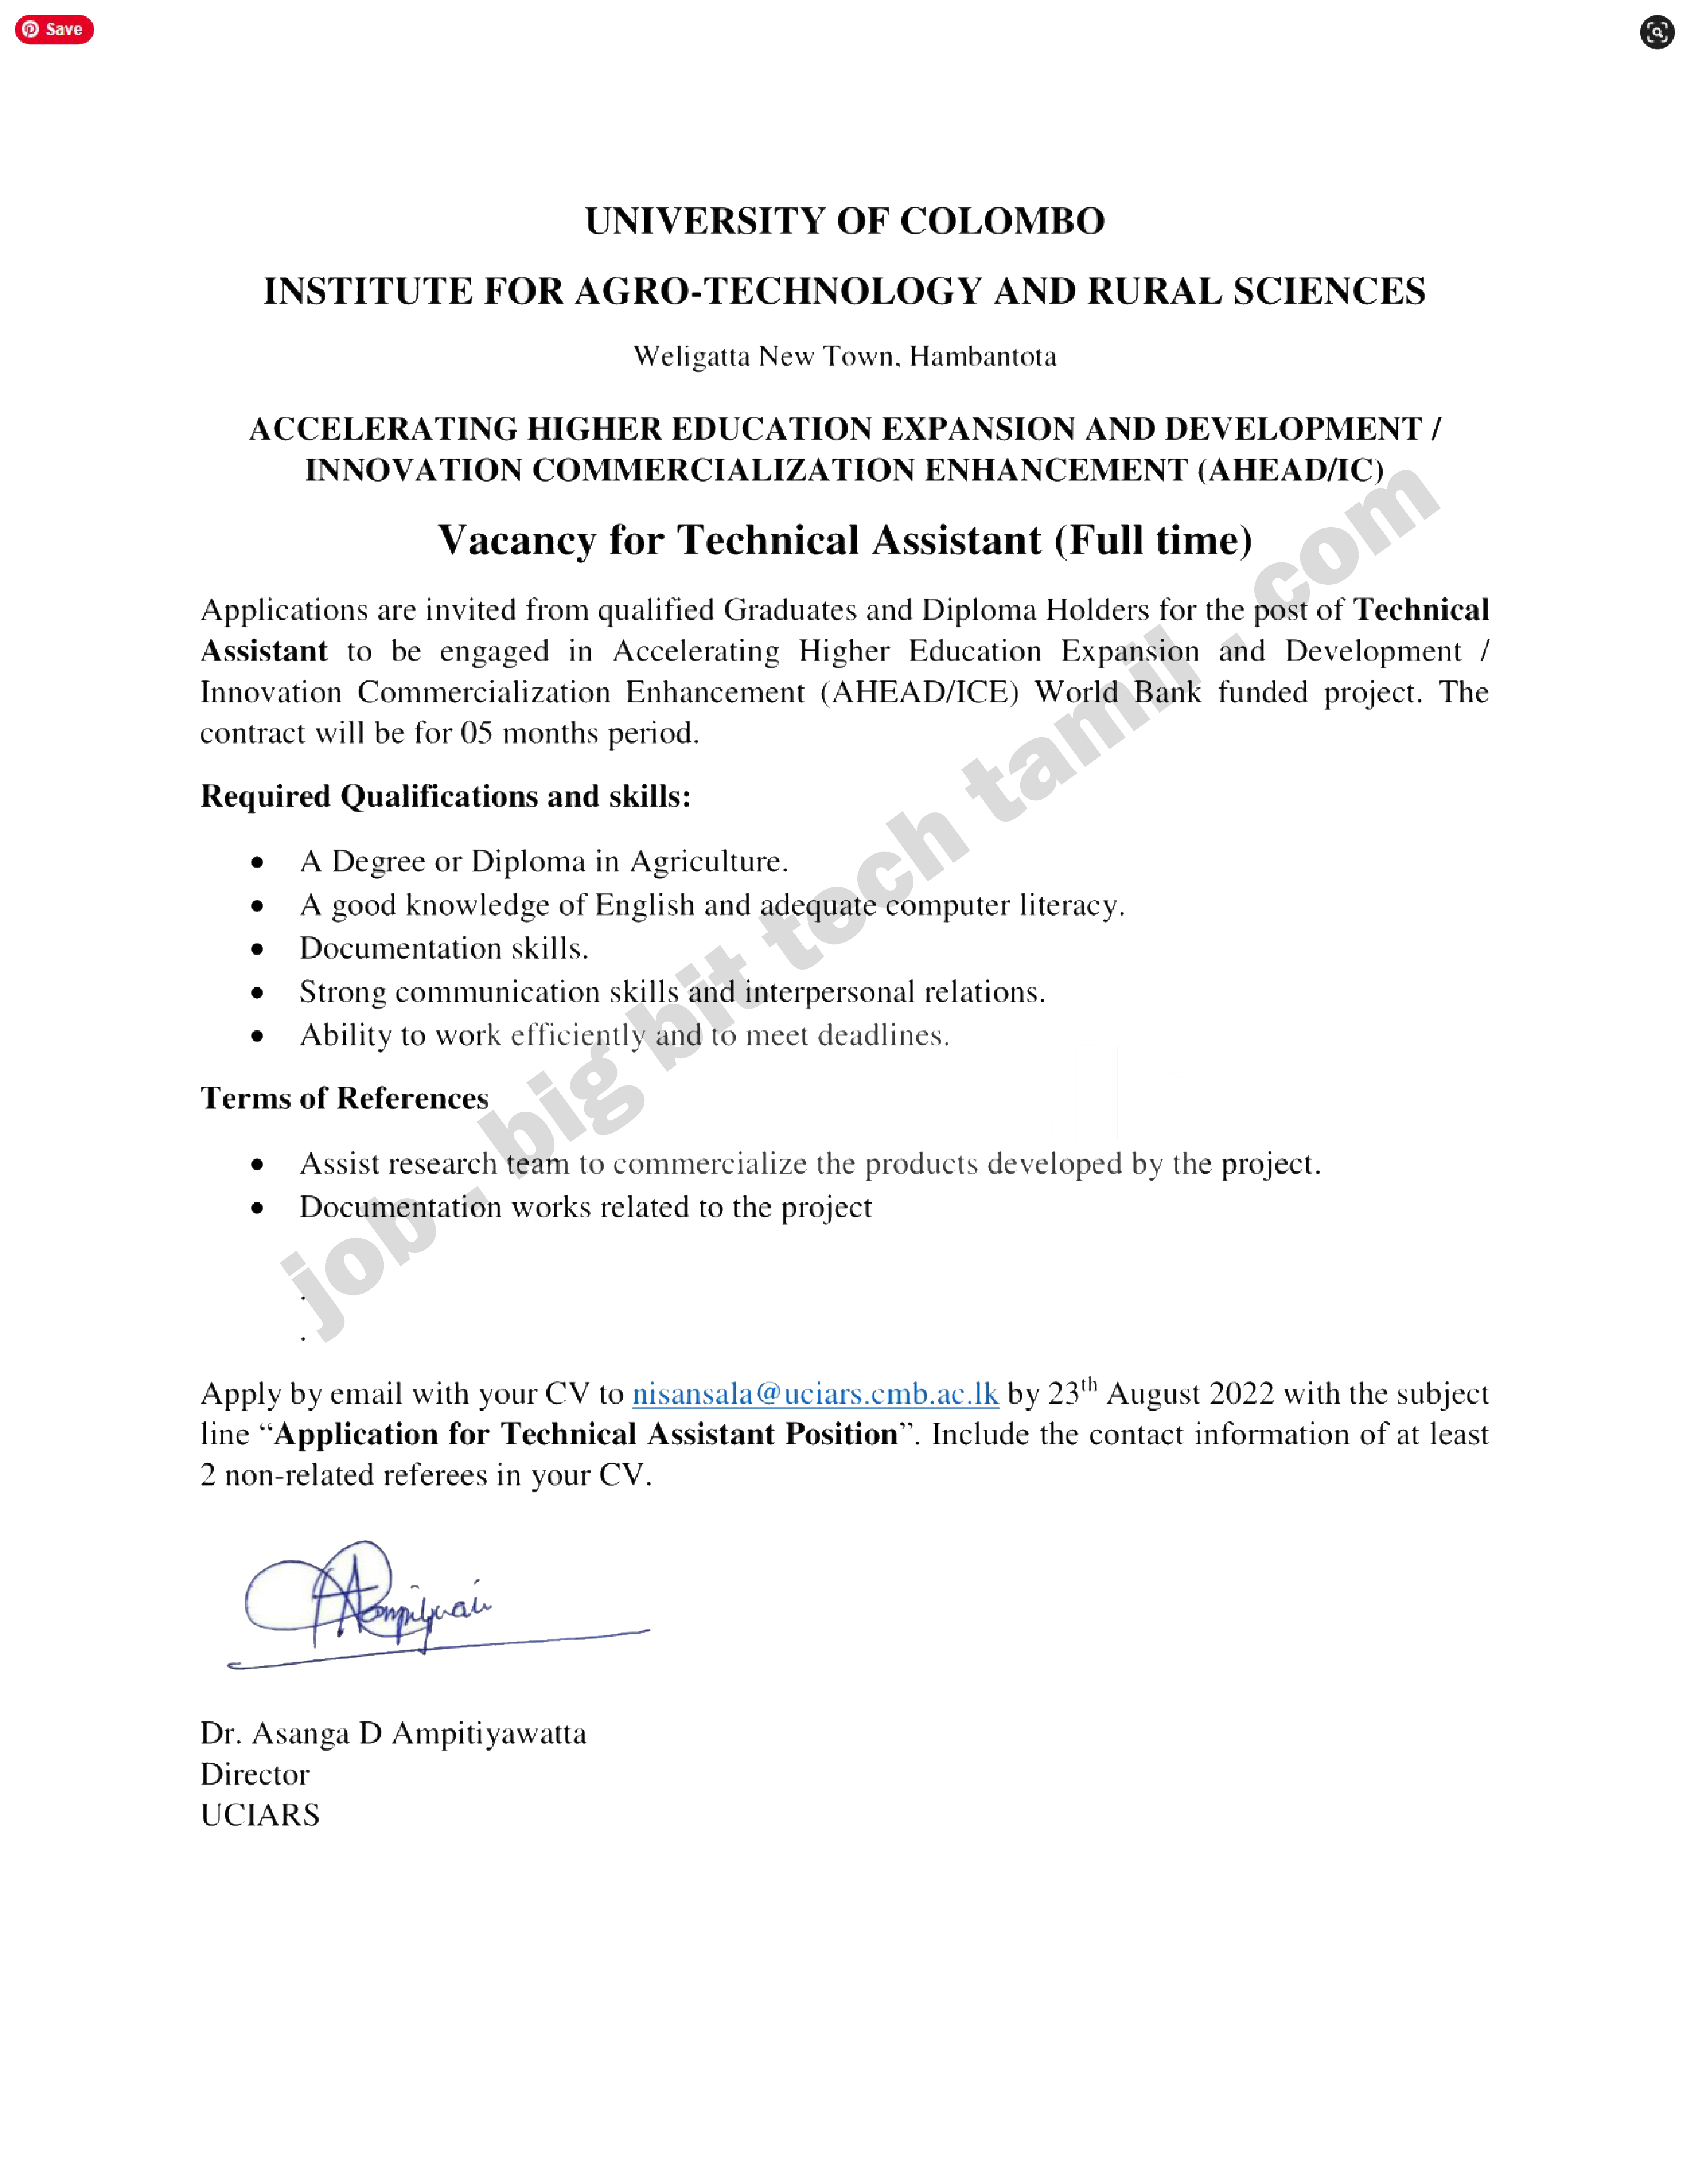 Technical Assistant Vacancies 2022 – University of Colombo